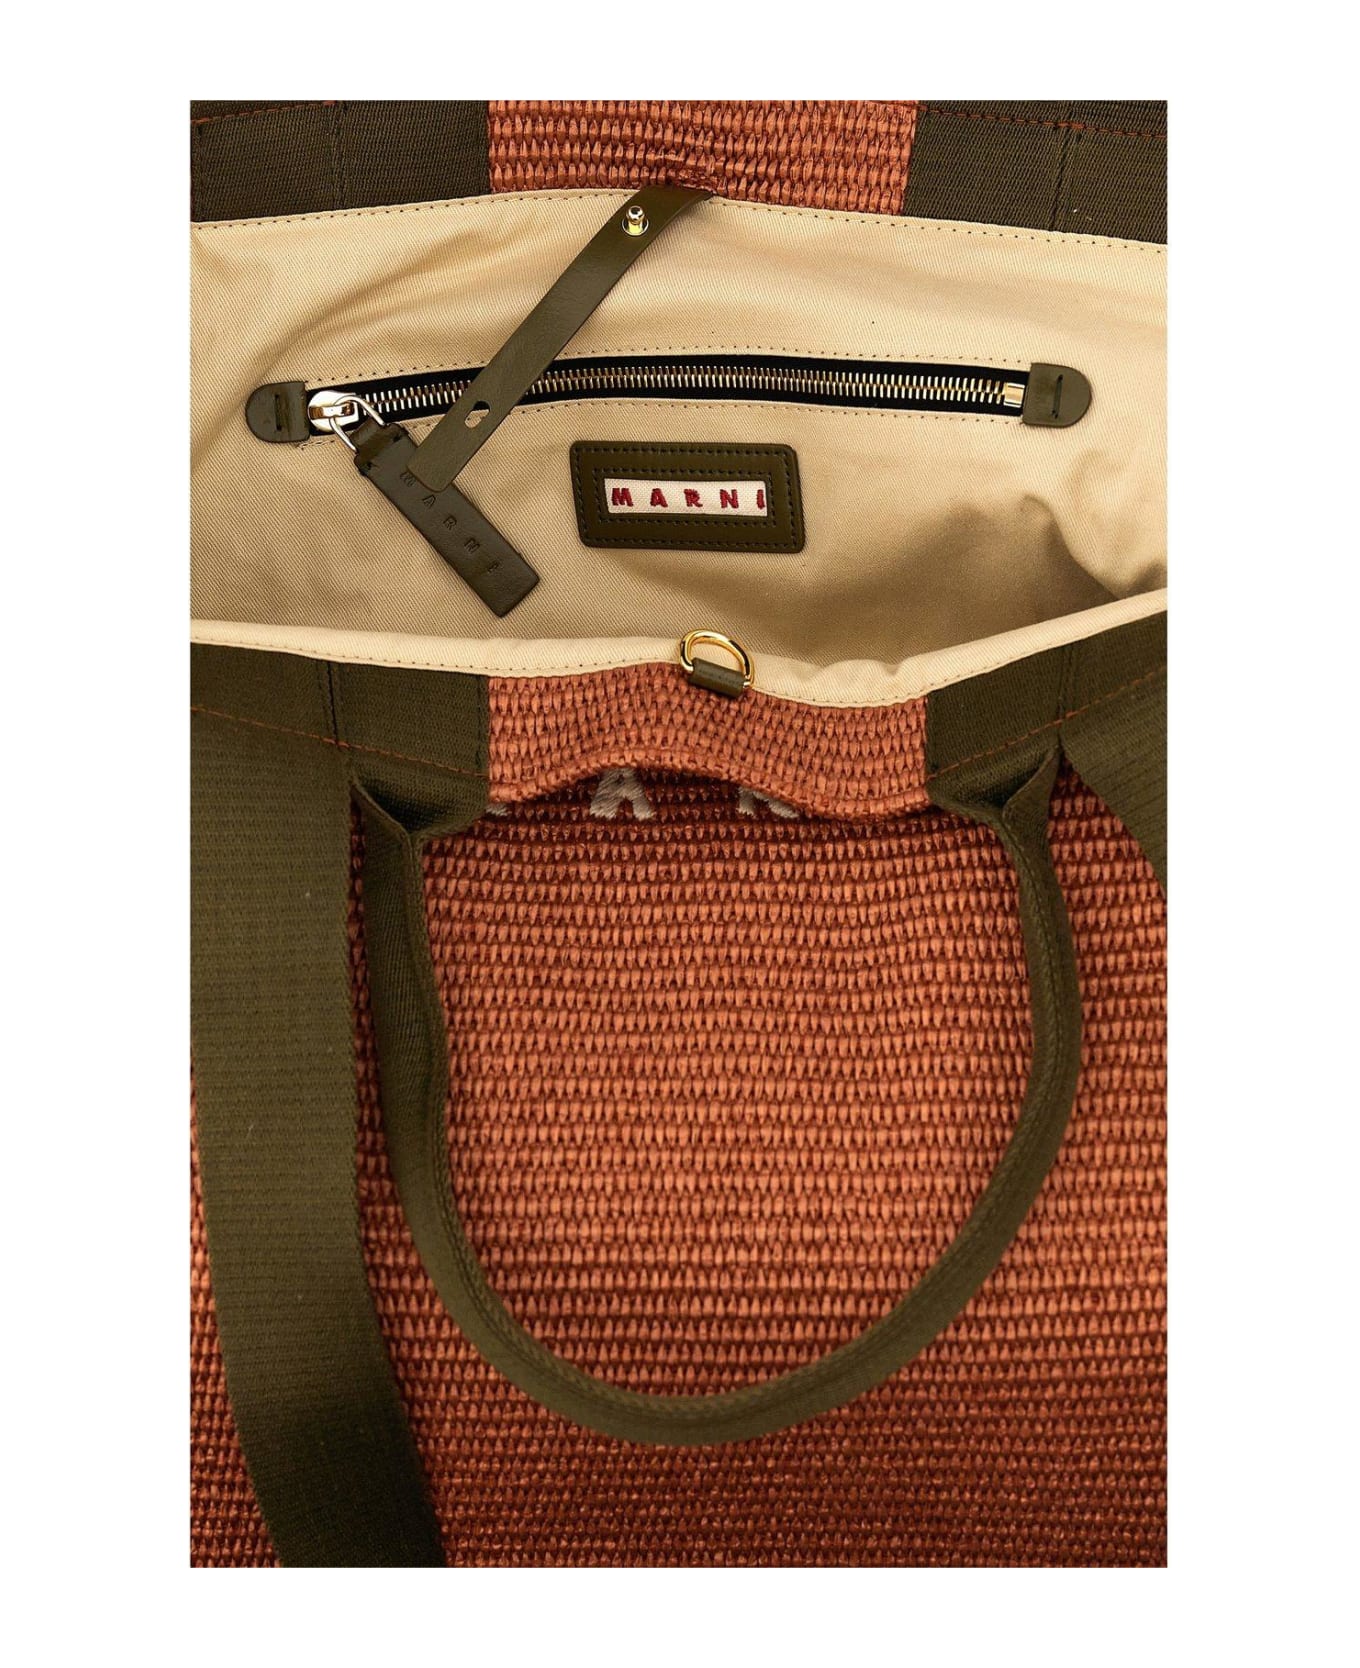 Marni Logo Embroidered Woven Tote Bag - Brown トートバッグ